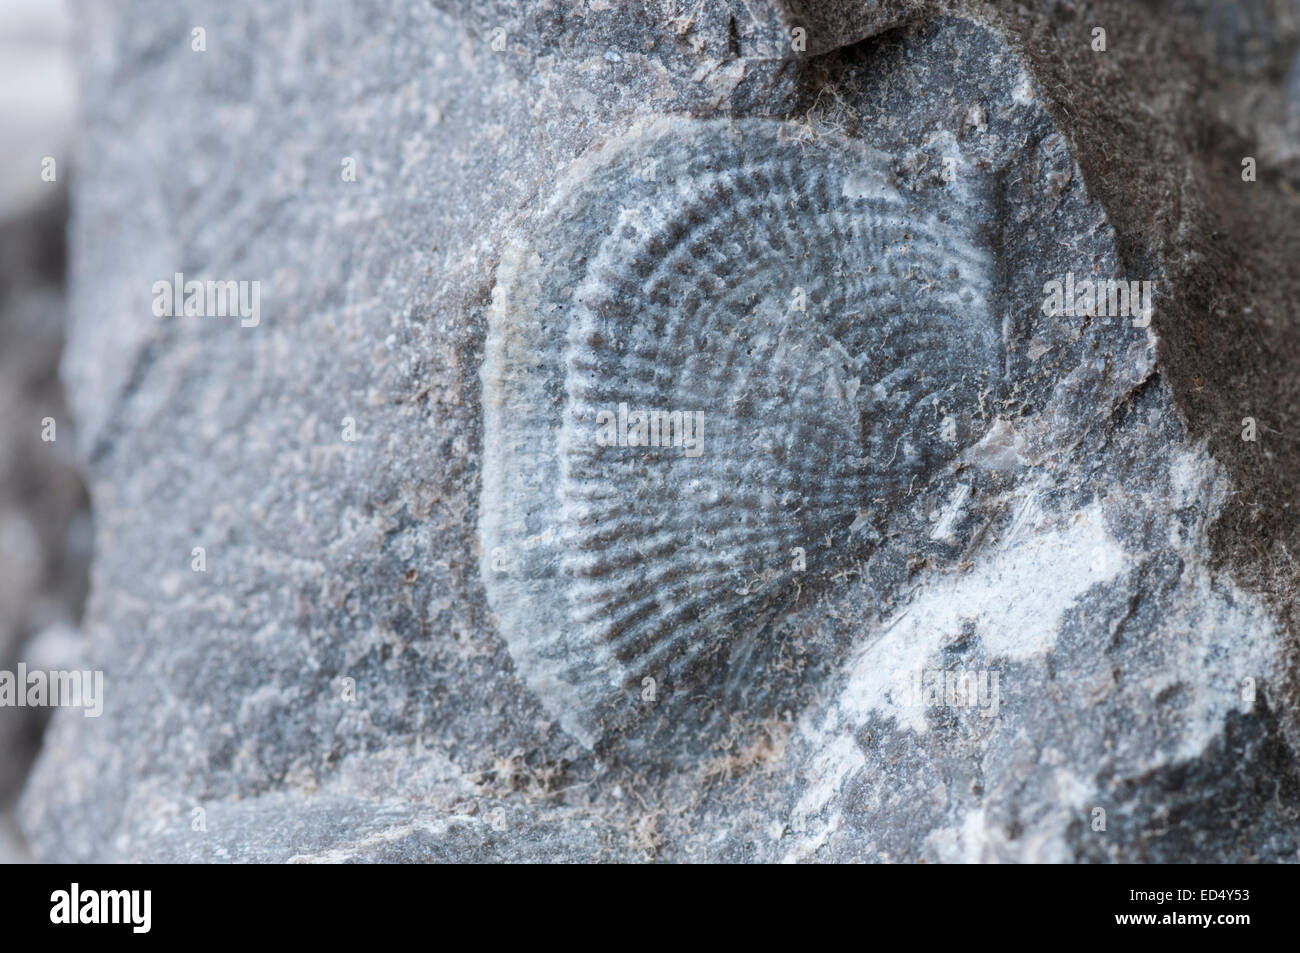 Brachial valve of the Carboniferous brachiopod Productus from Wensleydale, North Yorkshire Stock Photo